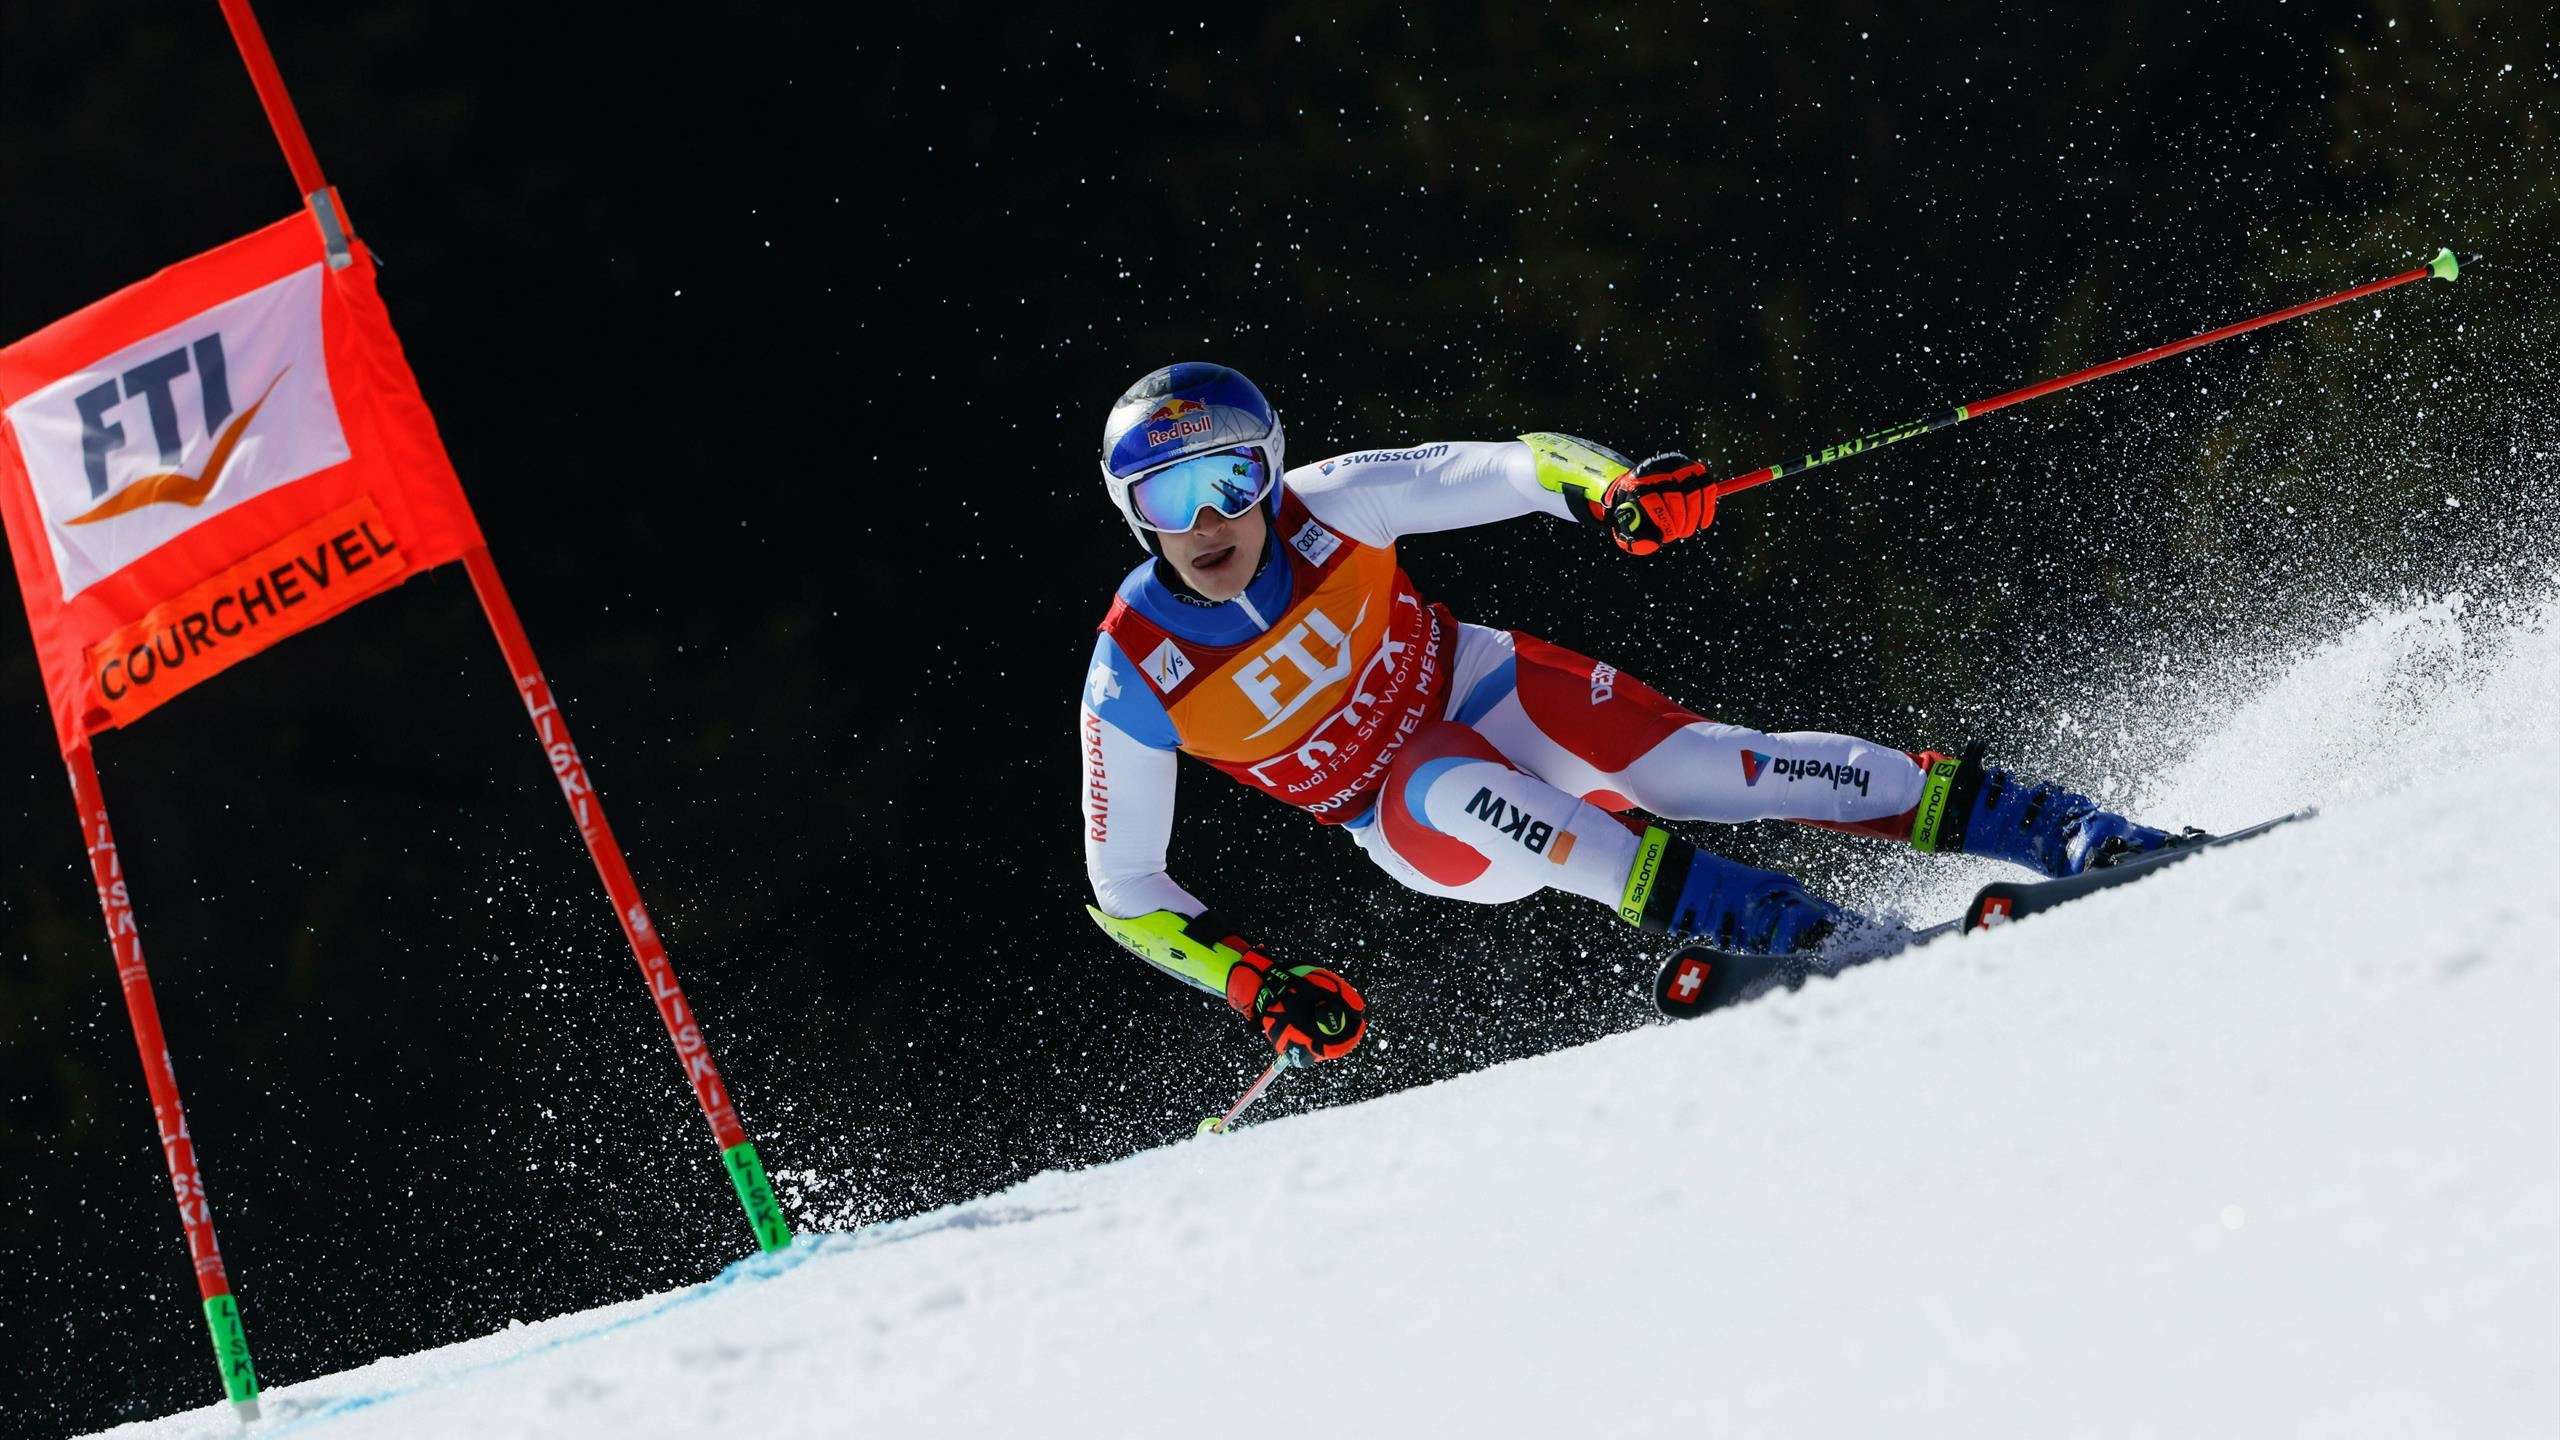 Alpine Skiing: Downhill in a zigzag over a snow-covered track, Race between poles and gates. 2560x1440 HD Background.